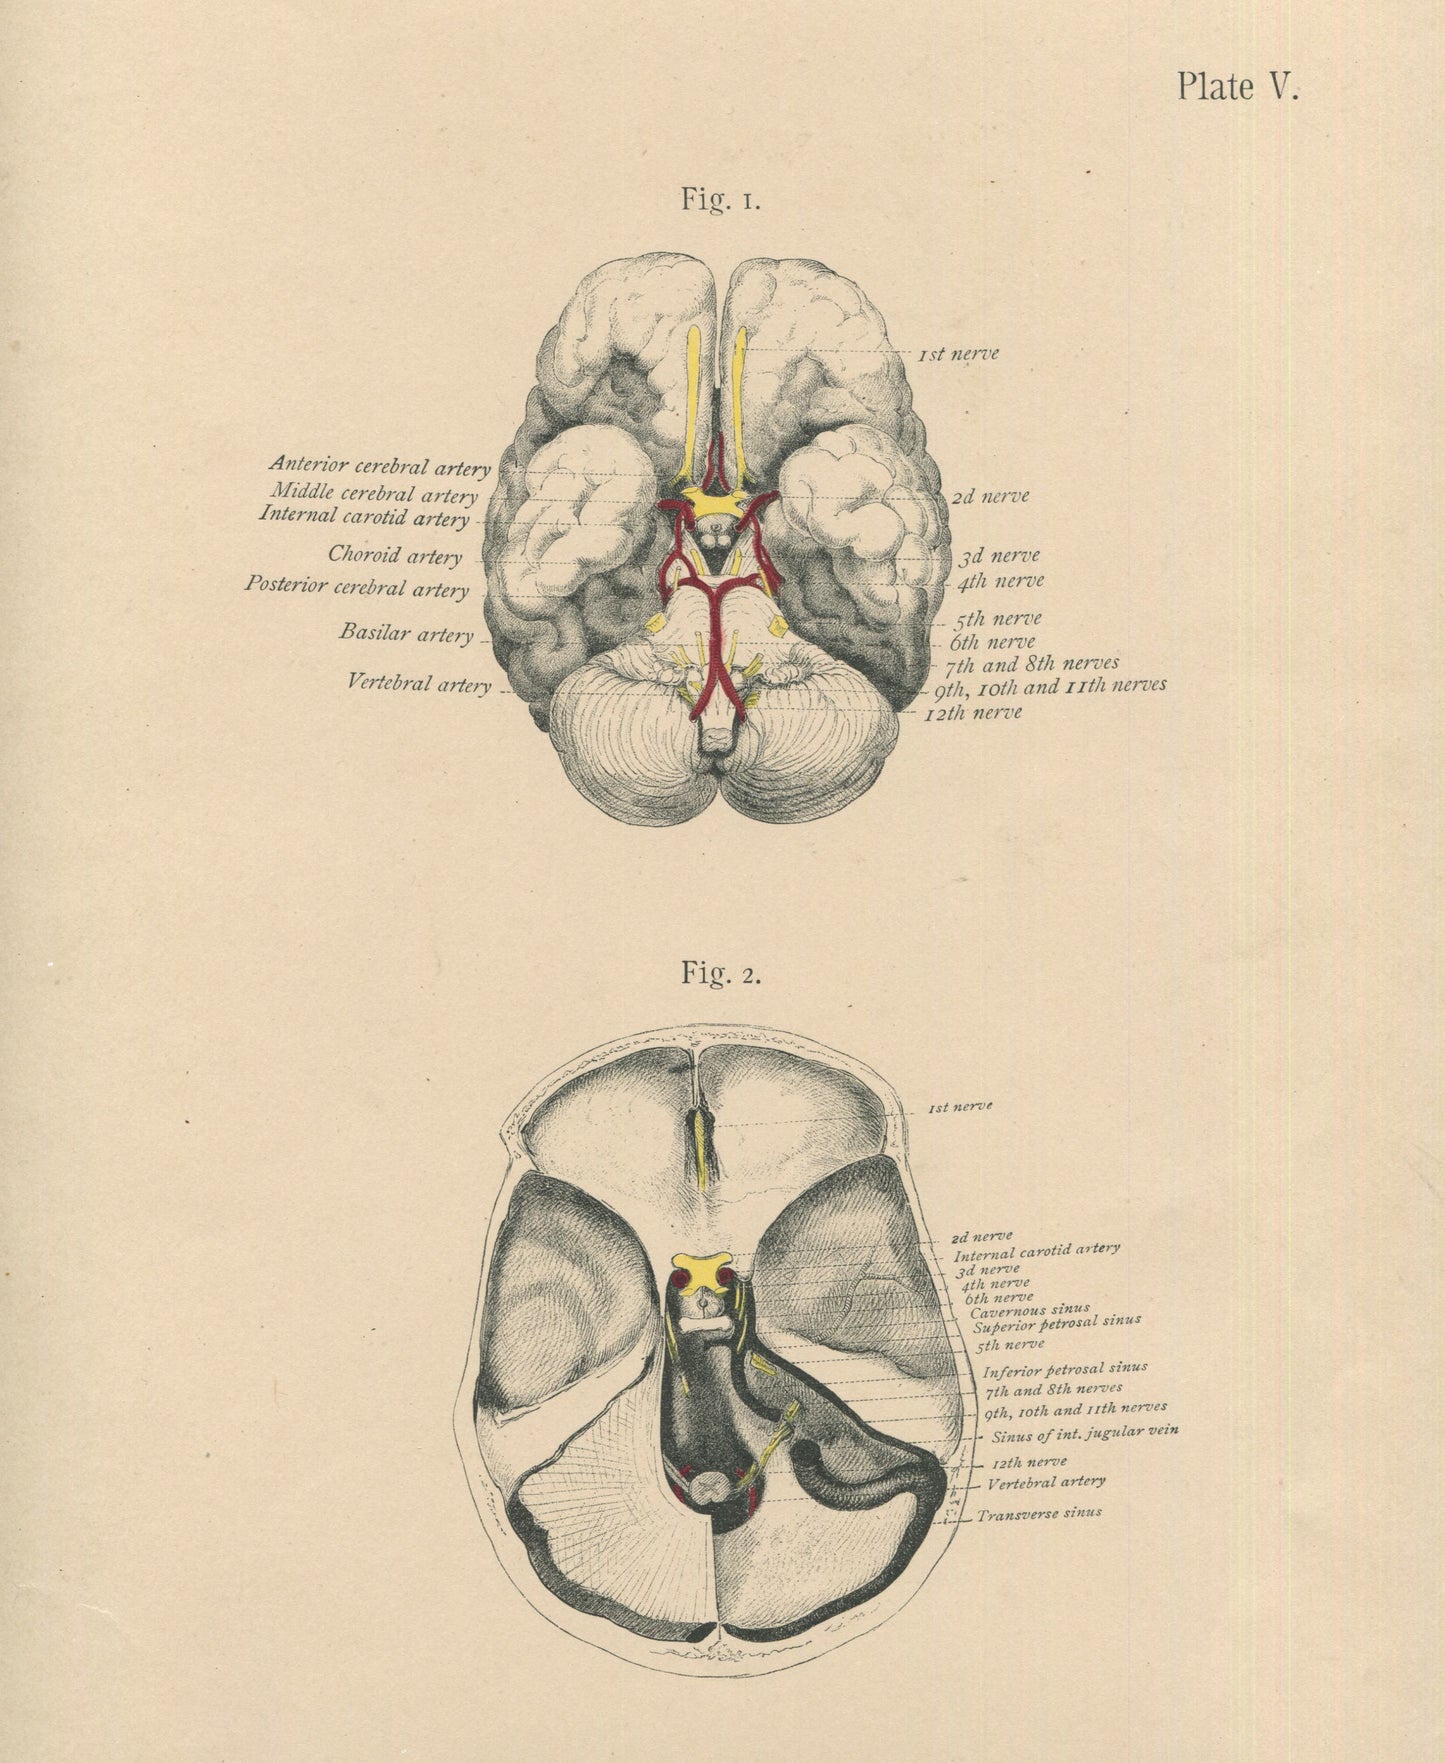 Matted Antique (c.1897) Anatomy Print, Plate V: Base of the Brain and Skull